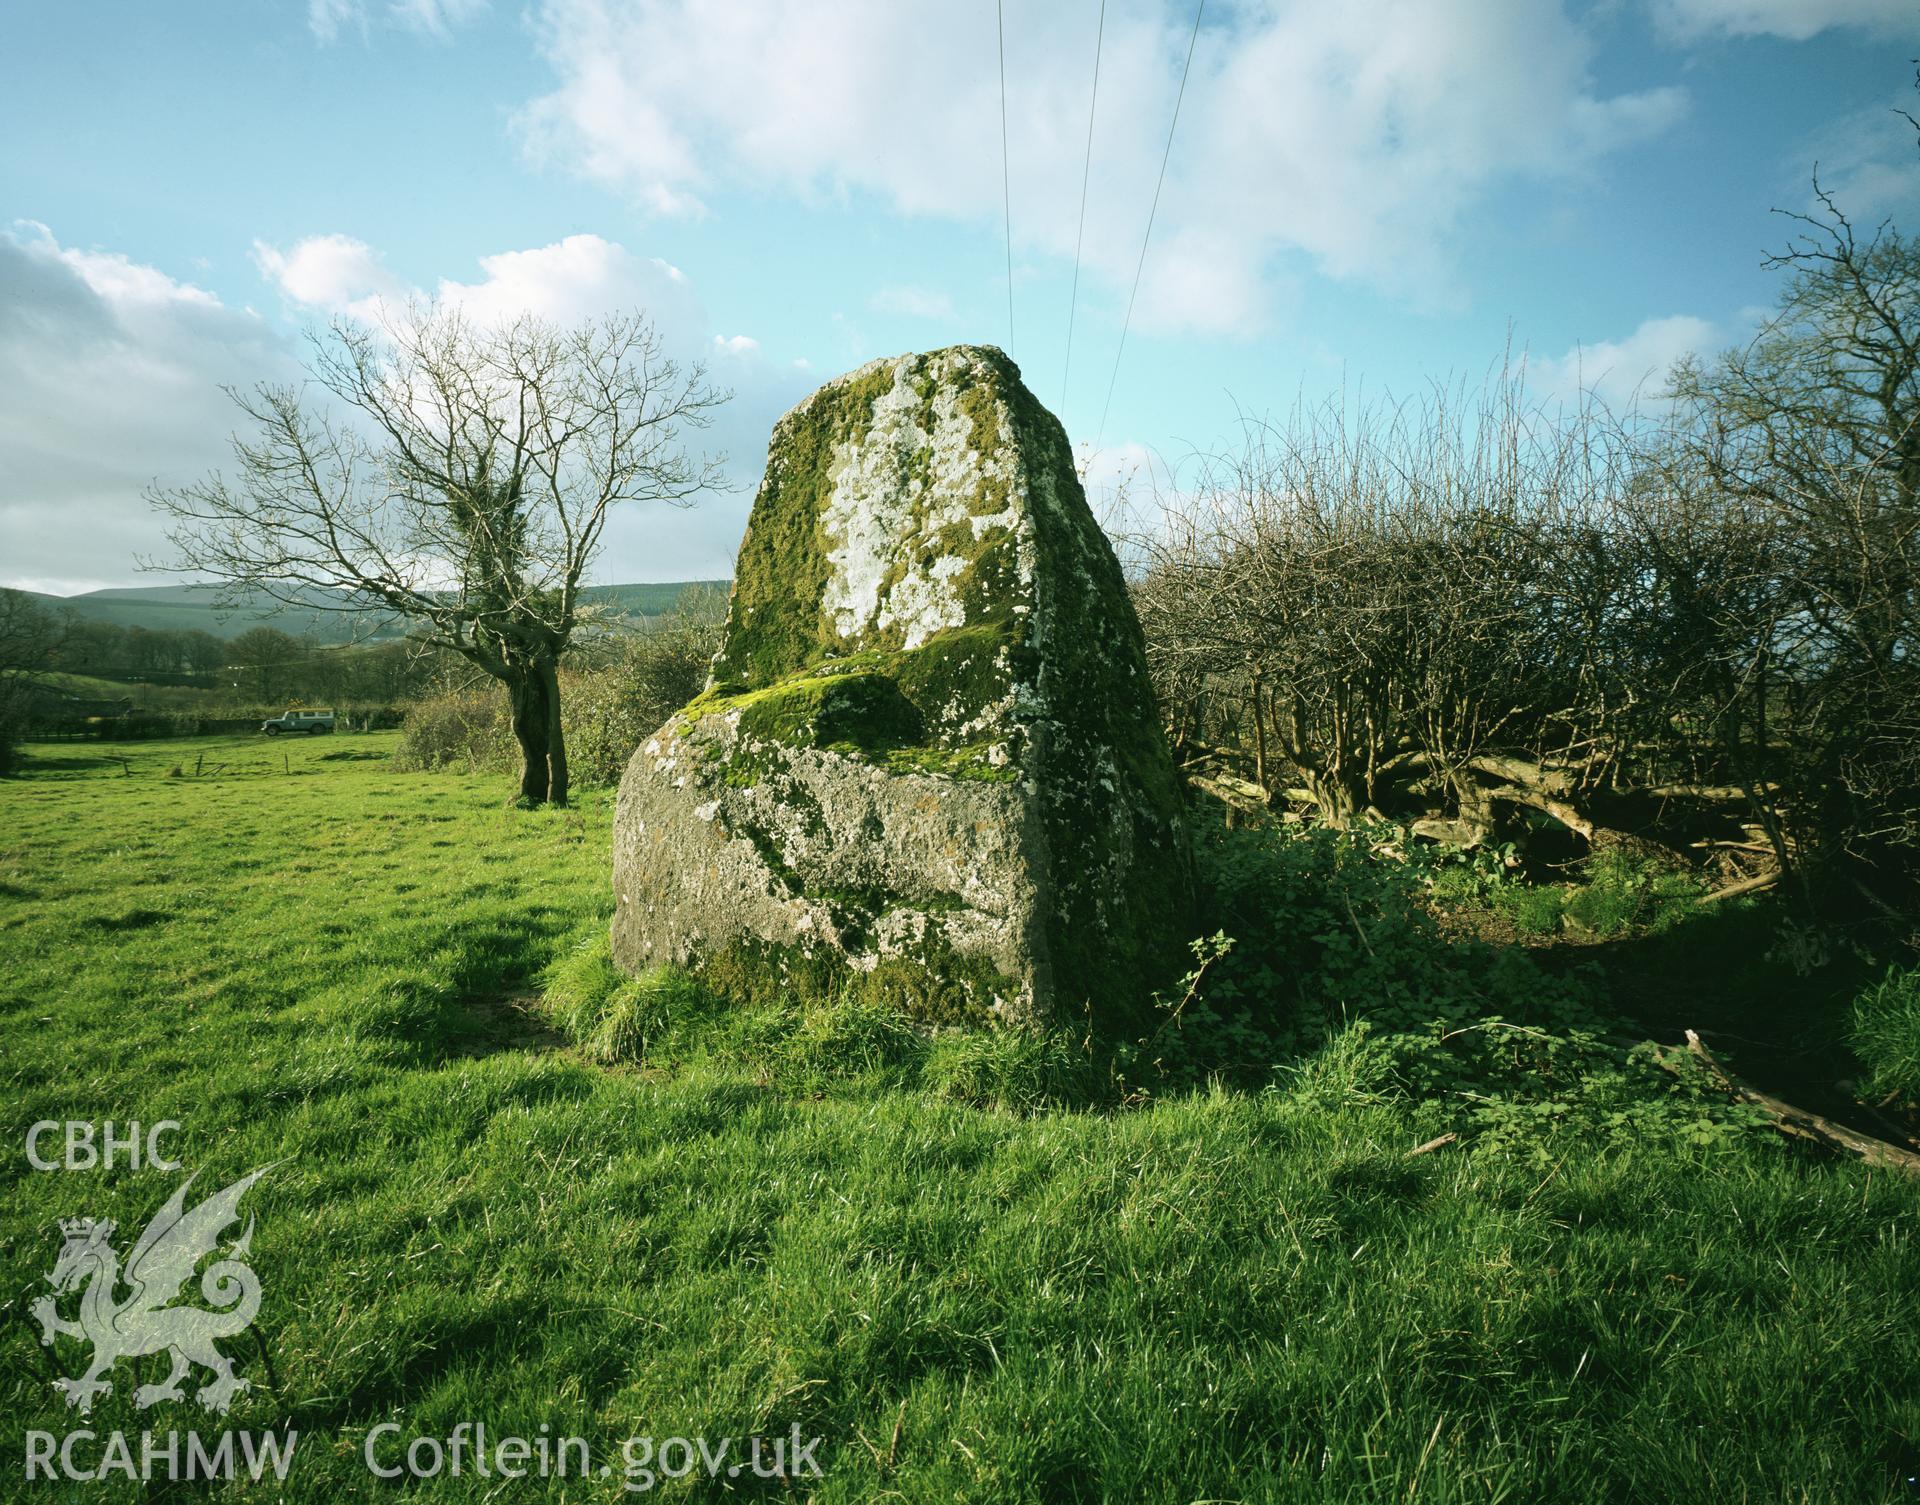 RCAHMW colour transparency of a view of the standing stone at Gileston